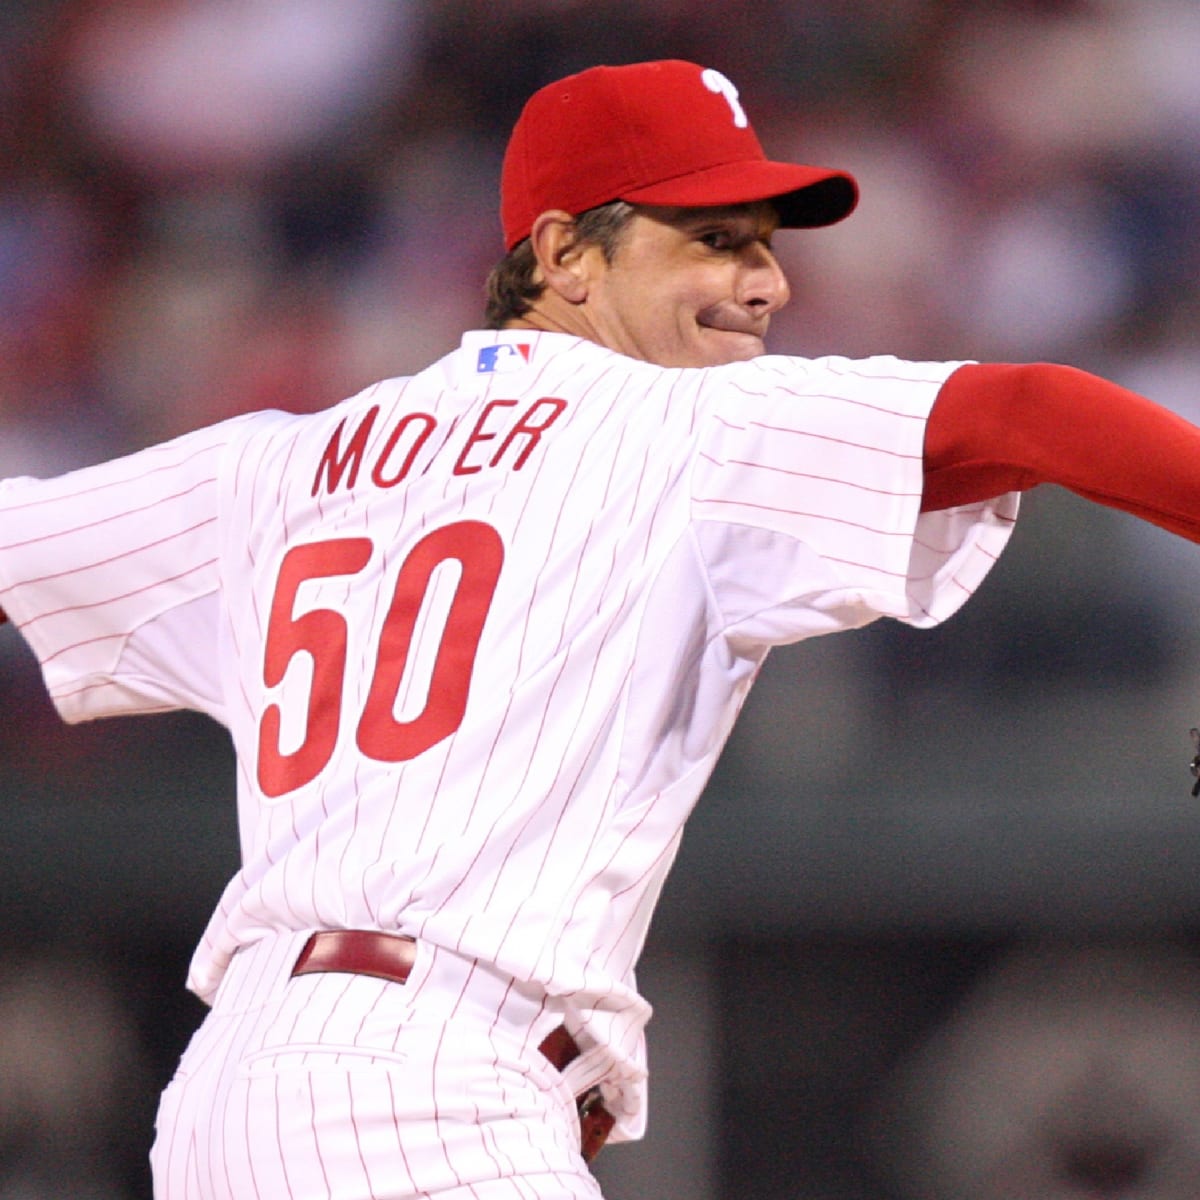 Jamie Moyer scheduled to appear at Volcanoes Stadium Friday